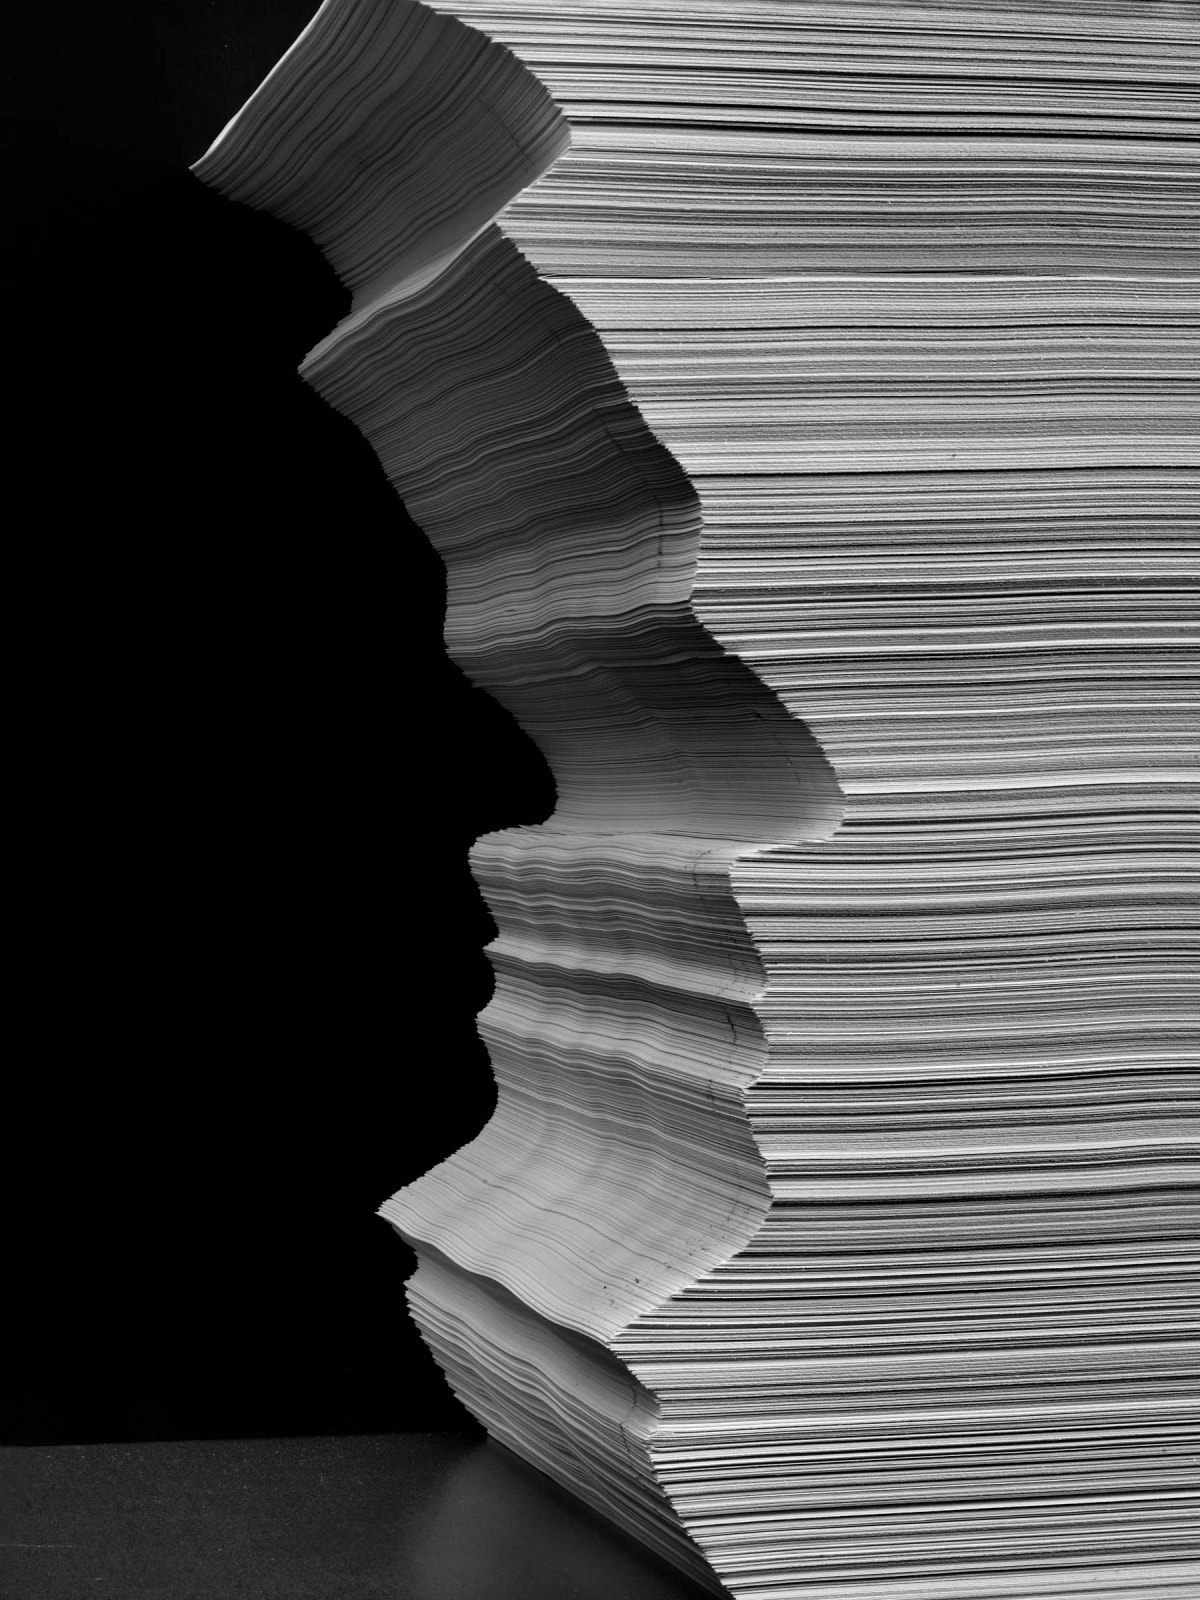 Abelardo Morell Paper Self silhouette of artist's profile cut into stack of papers